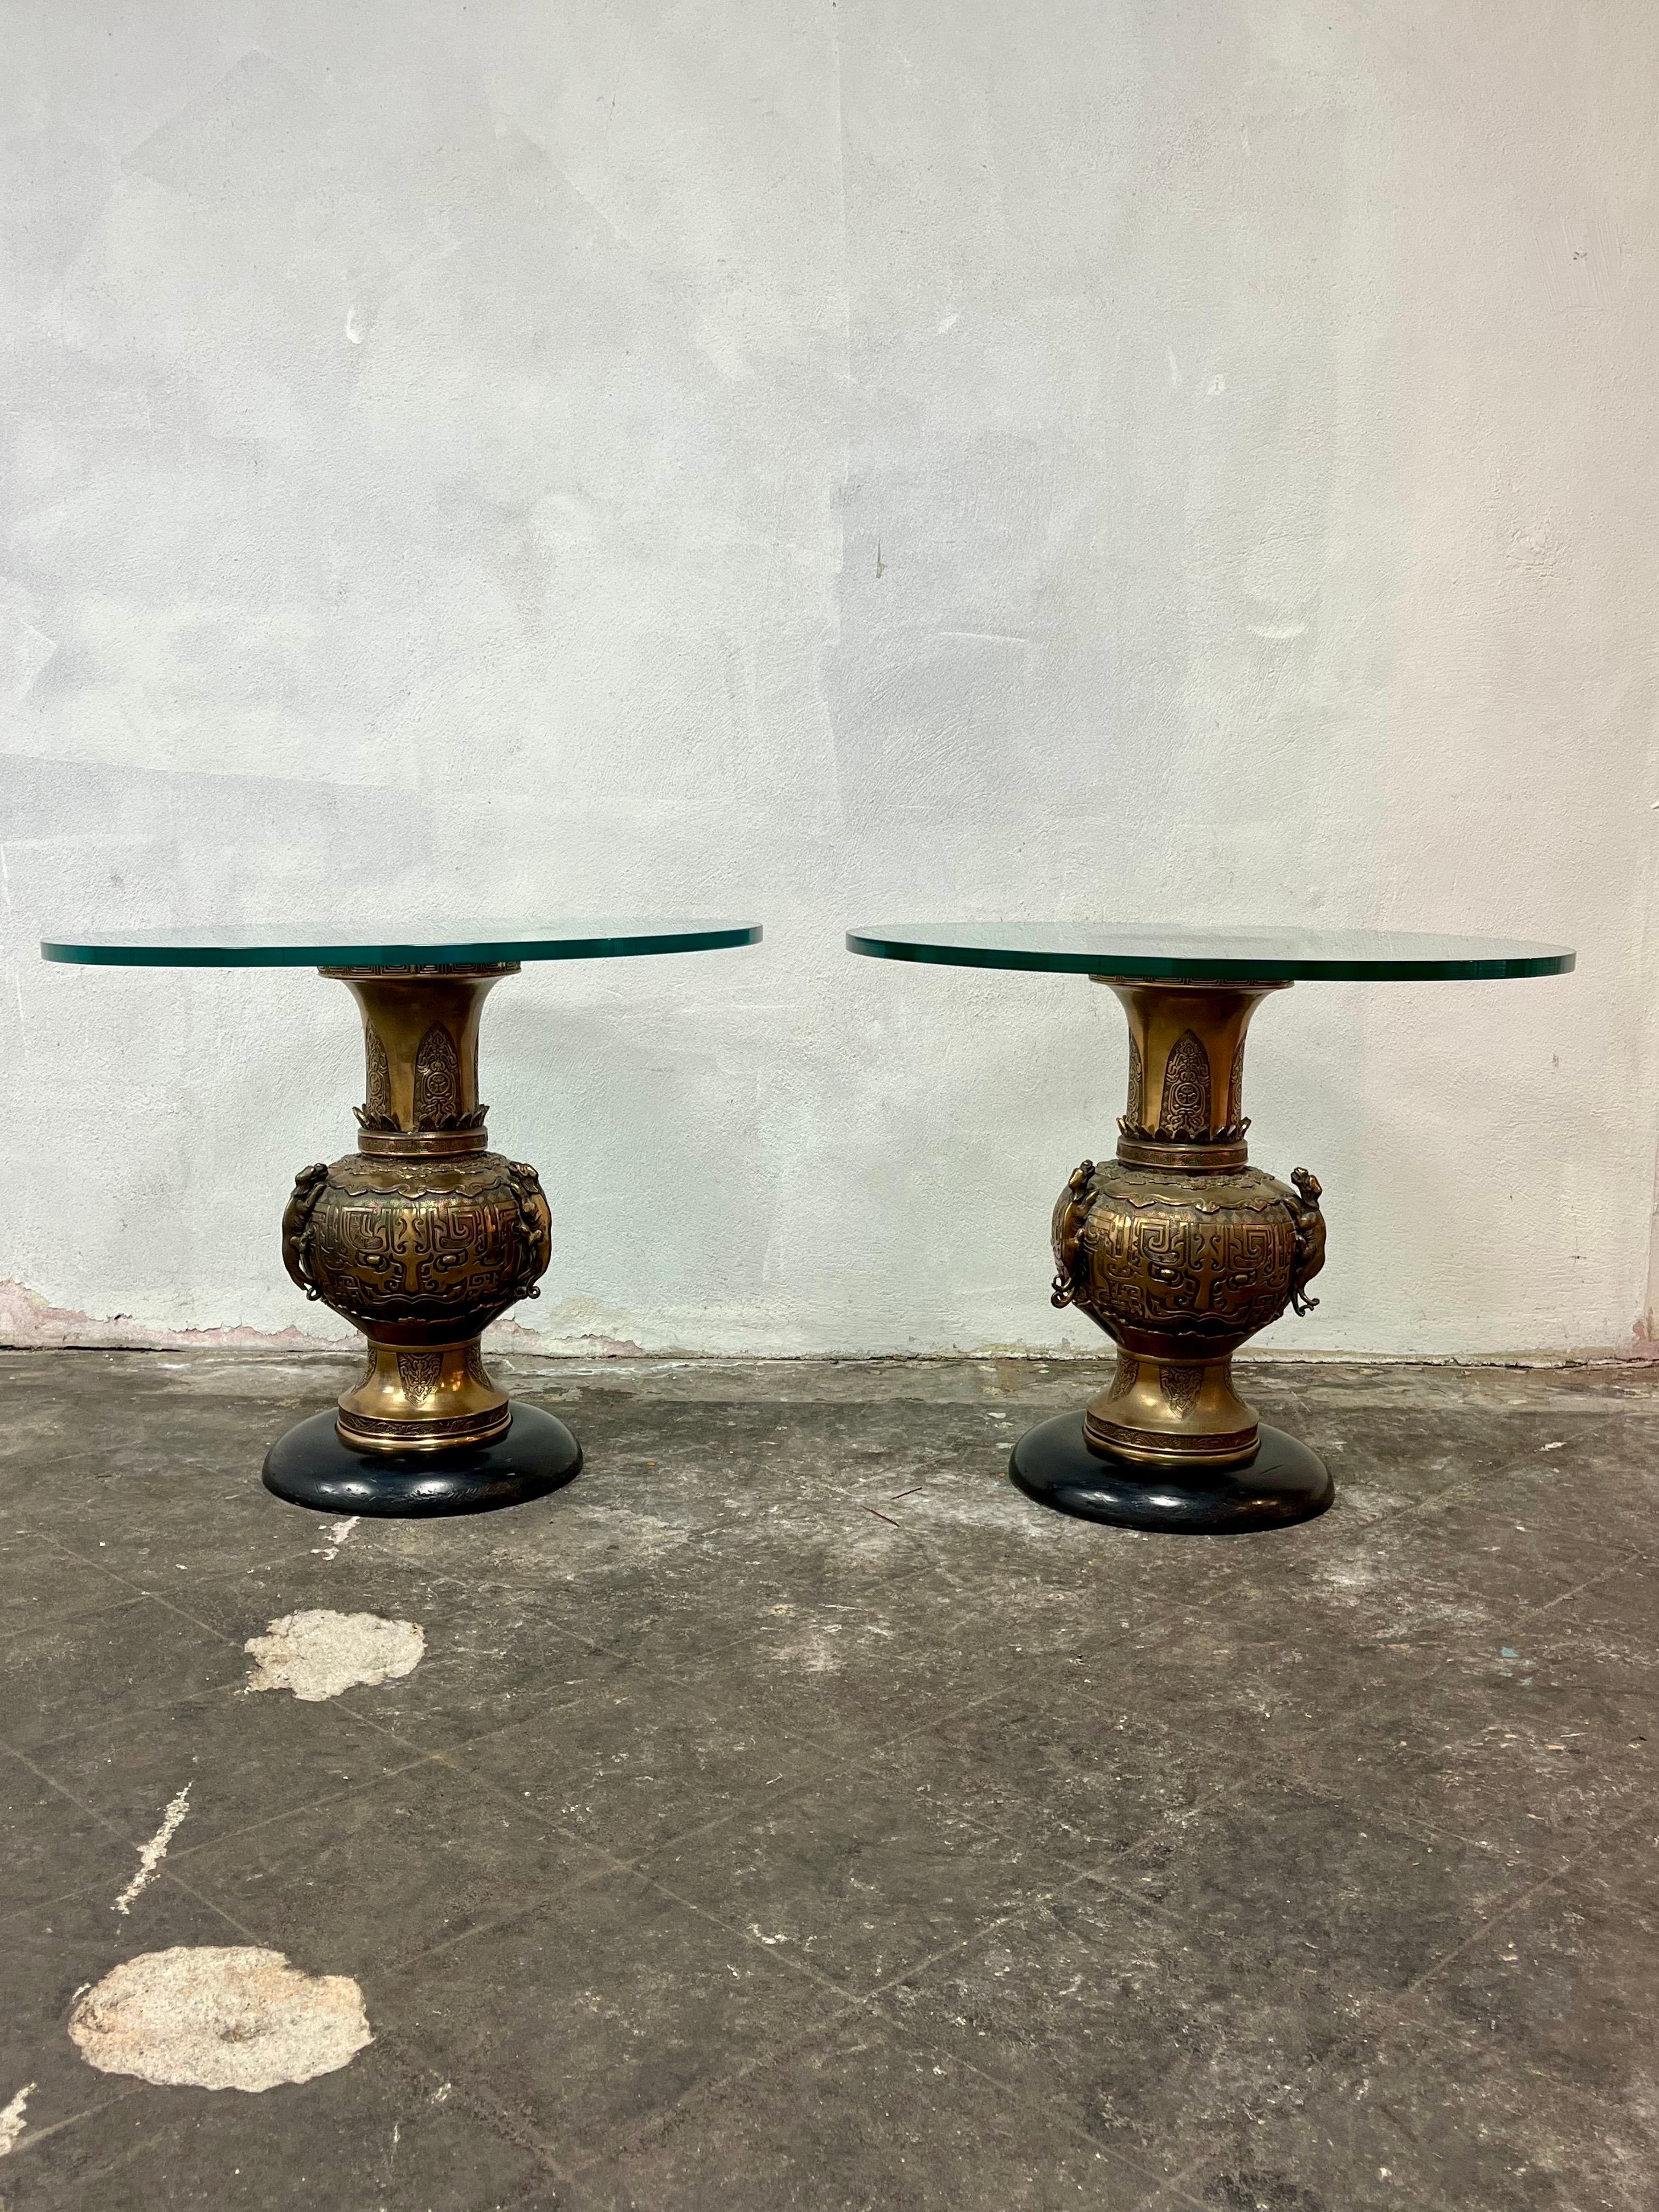 Beautiful pair of Mid Century Japanese Vase tables with a James Mont flair. Great deep detailing in base and nicely balance atop soft rounded wood base. Thick 3/4” glass tops. 
Curbside to NYC/Philly $400